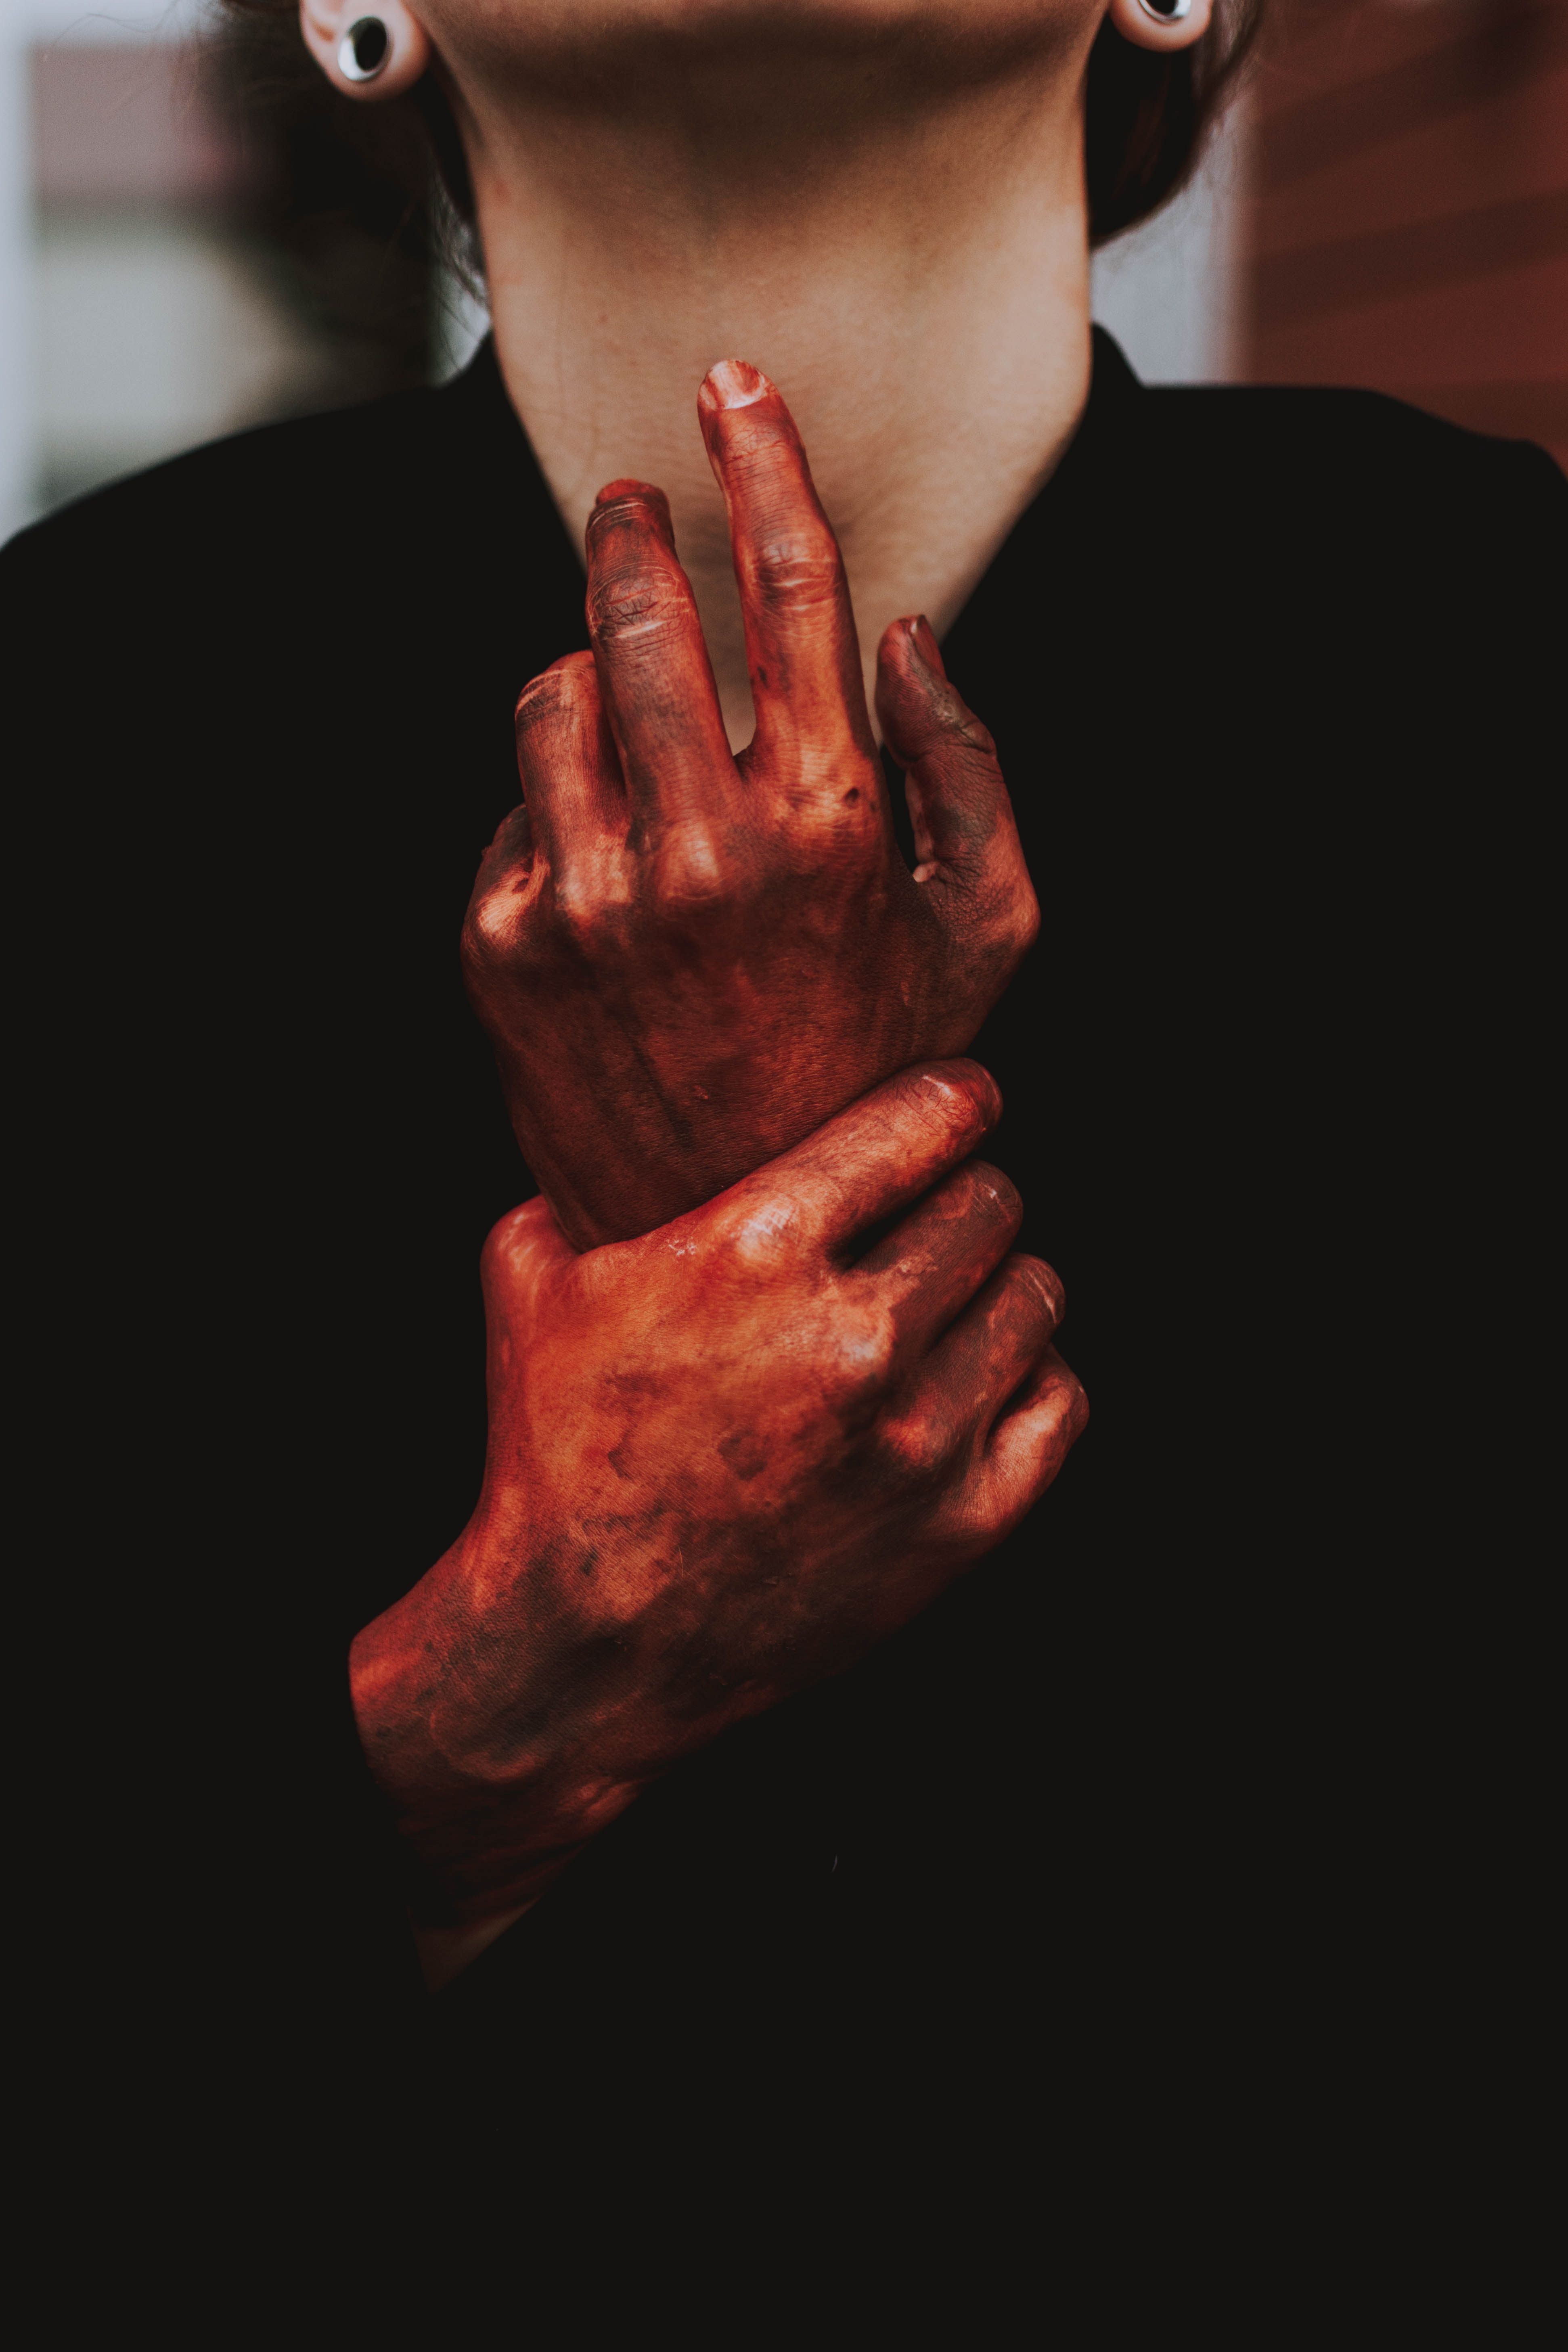 A woman with red paint on her hands - Blood